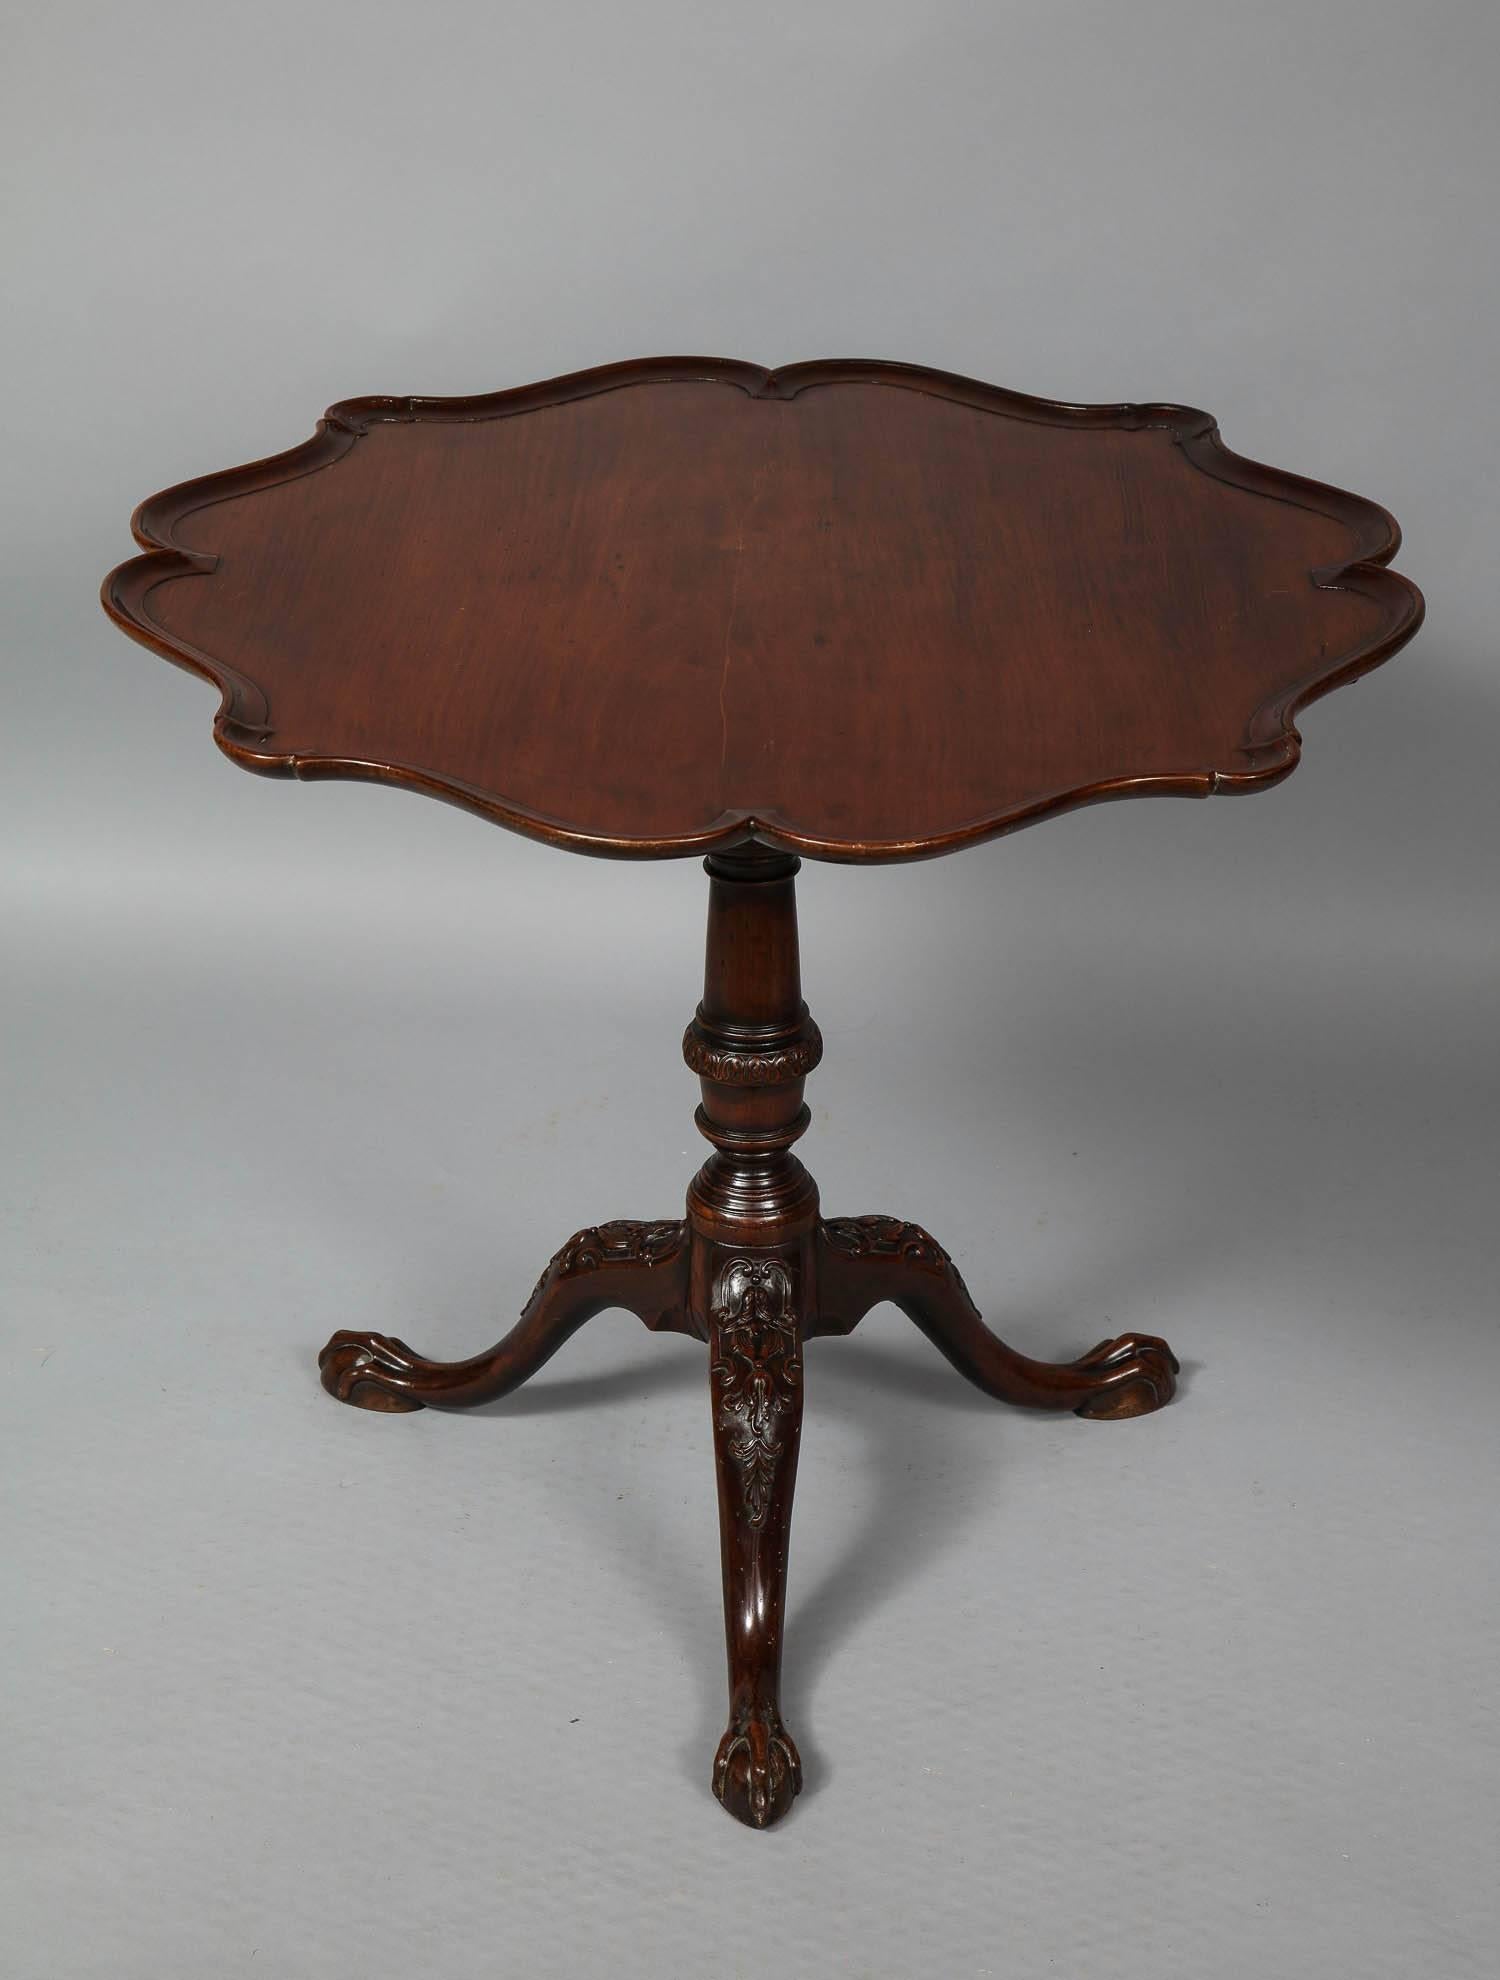 Good English 18th century tea table, the dished and lobed scalloped top fashioned from a single plank of wood, standing on turned shaft with acanthus leaf carved collar, standing on shaped feet ending in elongated ball and claw feet, unusually